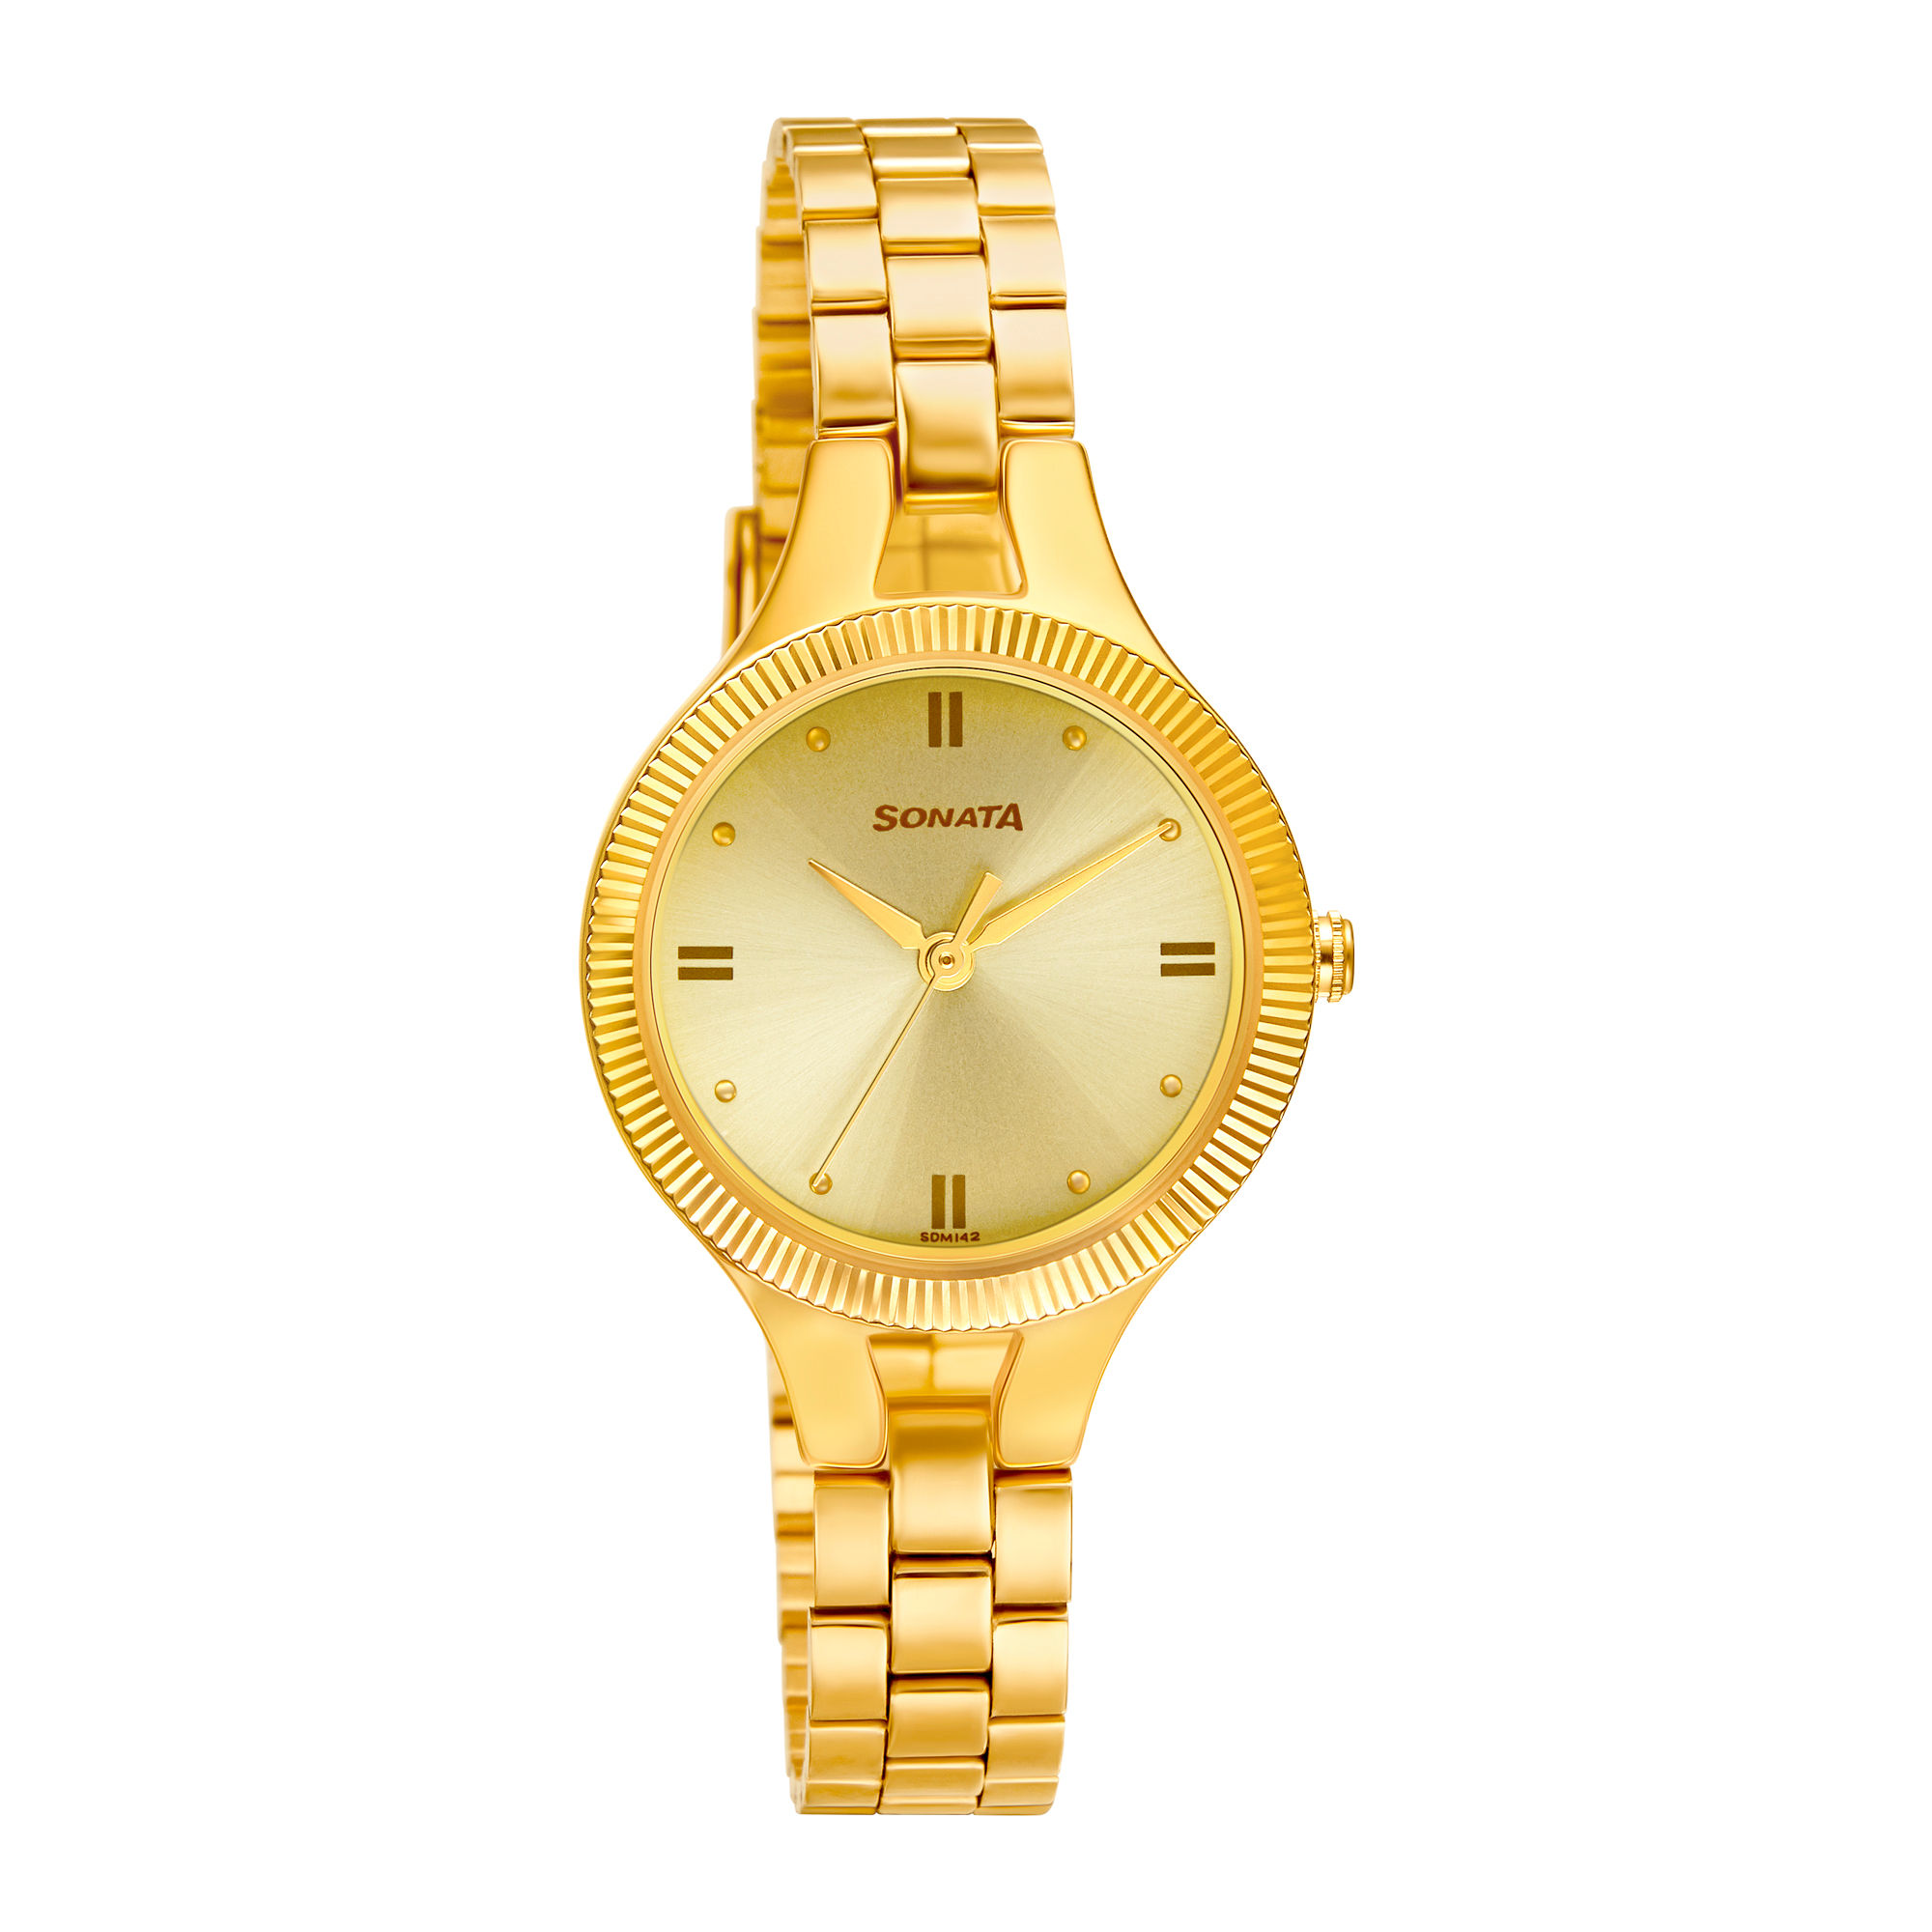 Shop Sonata Watches For Women Online At Great Price Offers